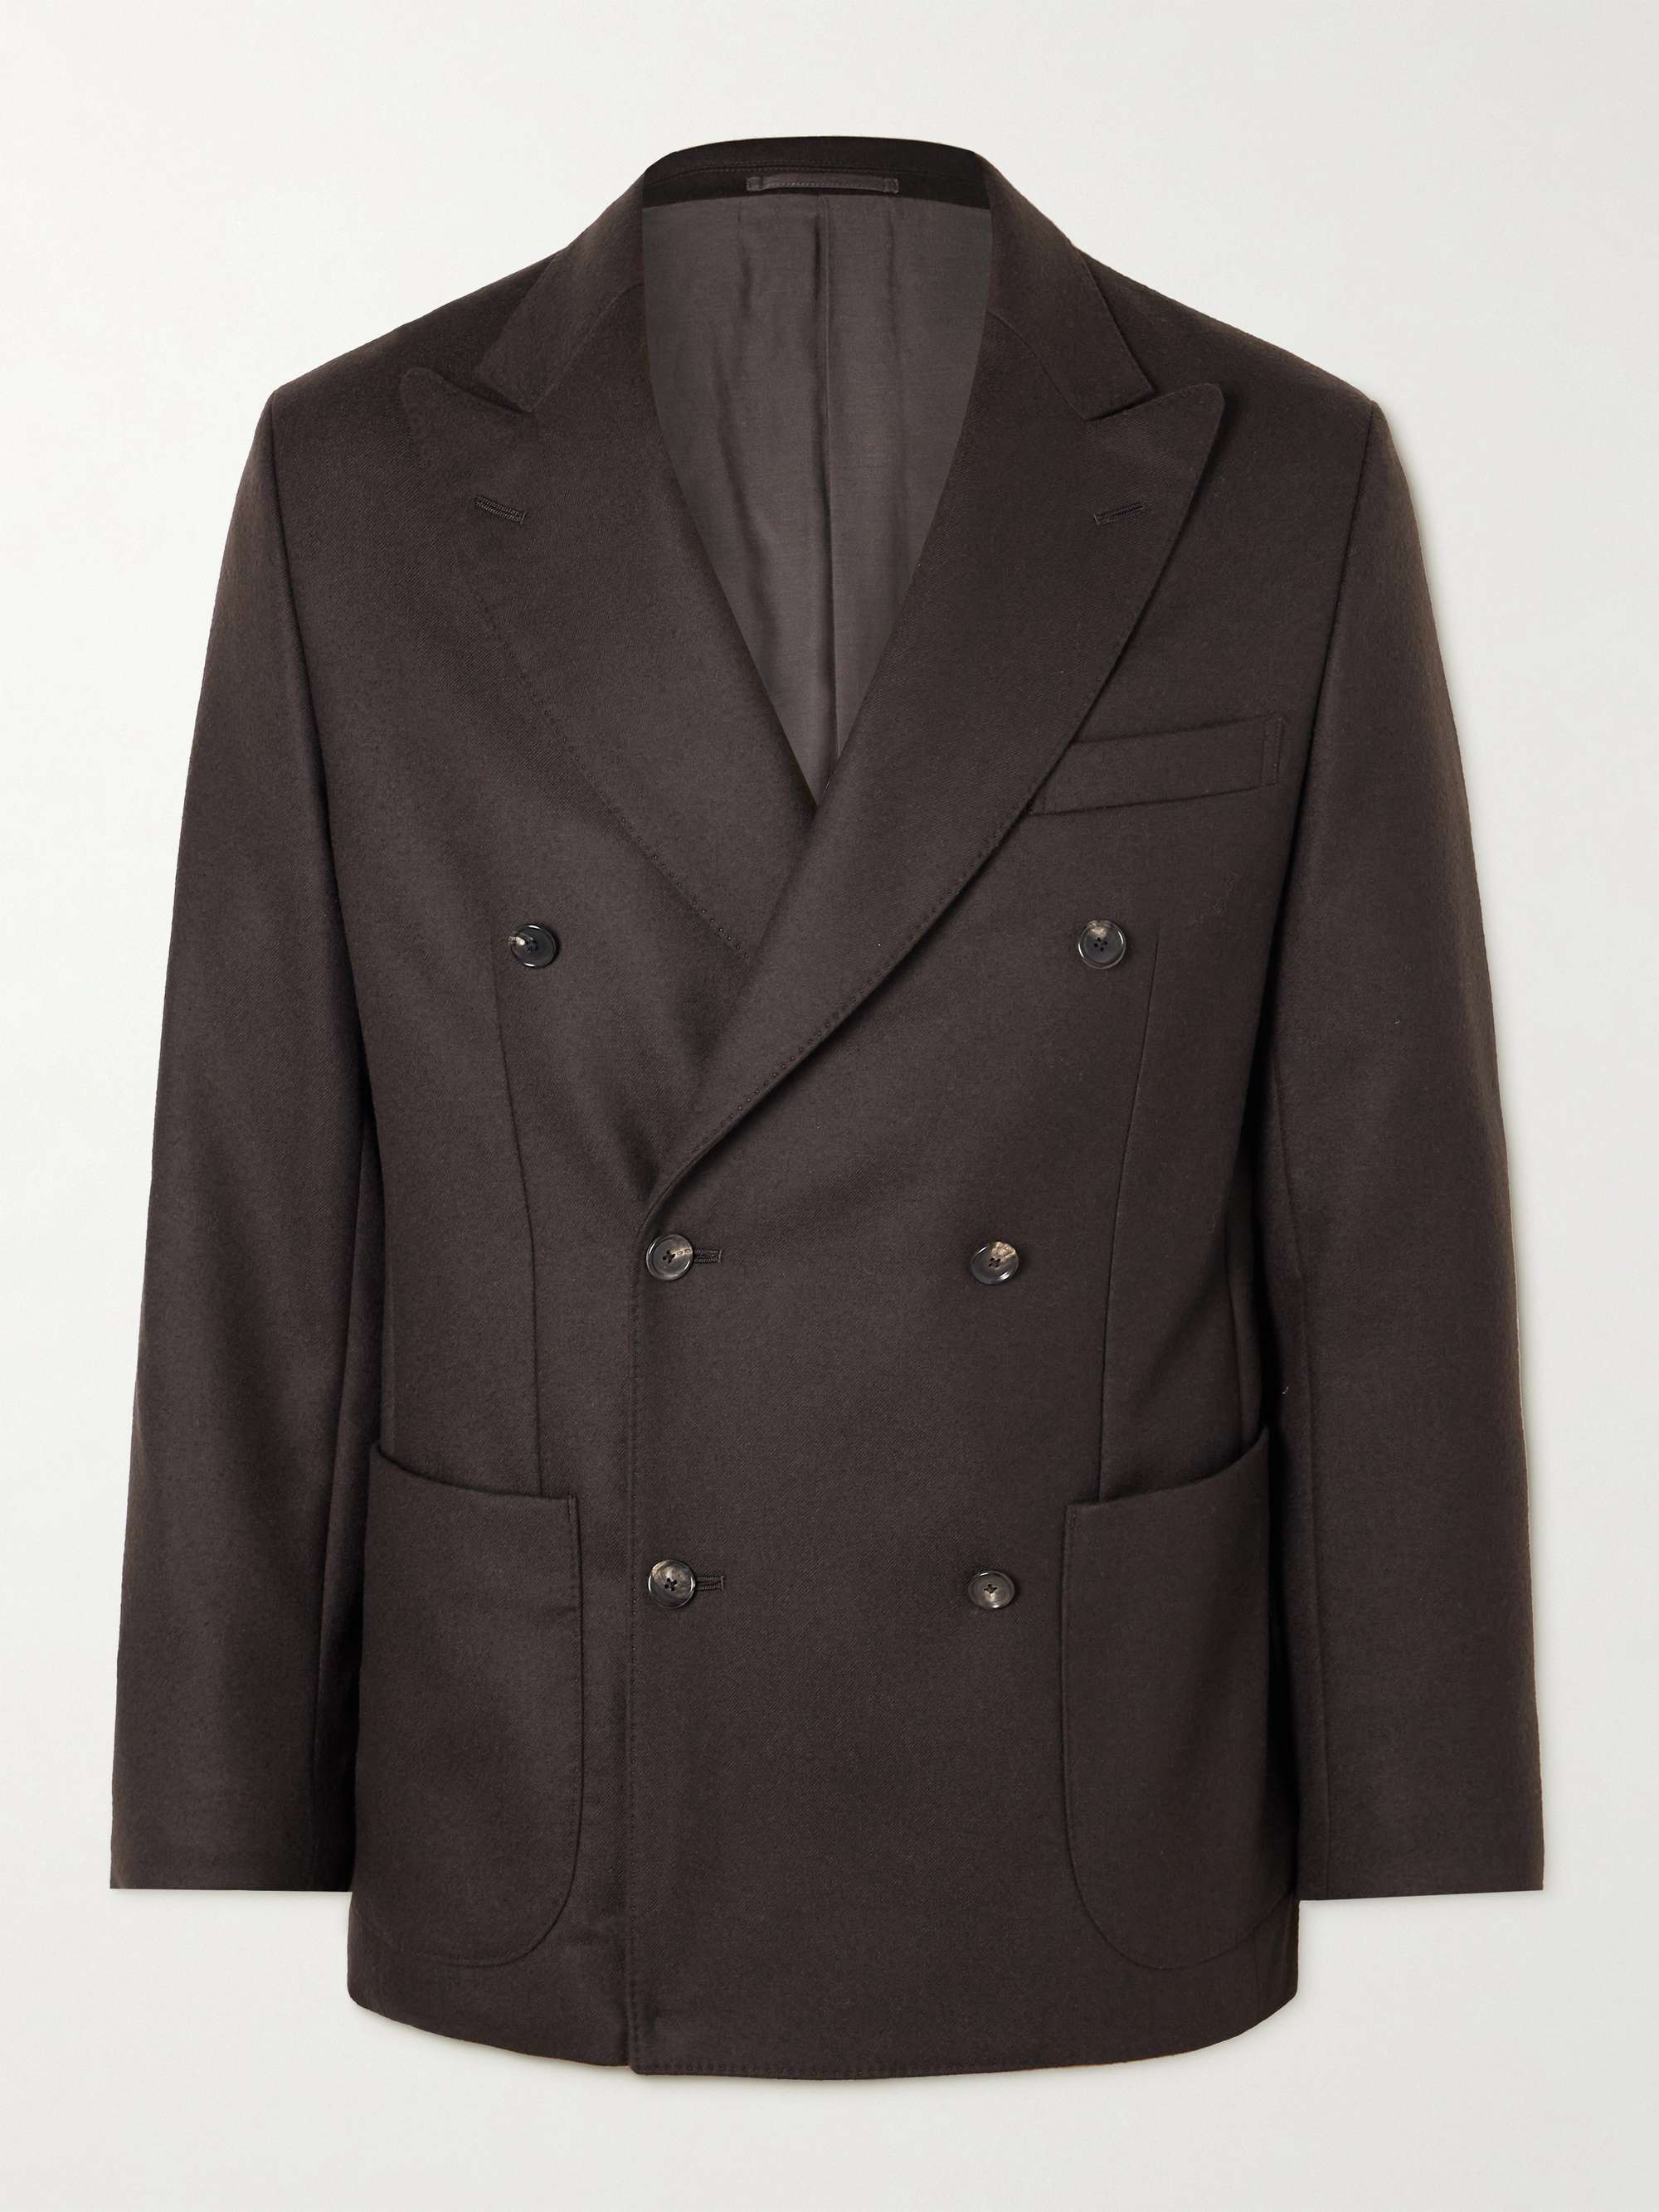 + Throwing Fits Double-Breasted Wool Suit Jacket